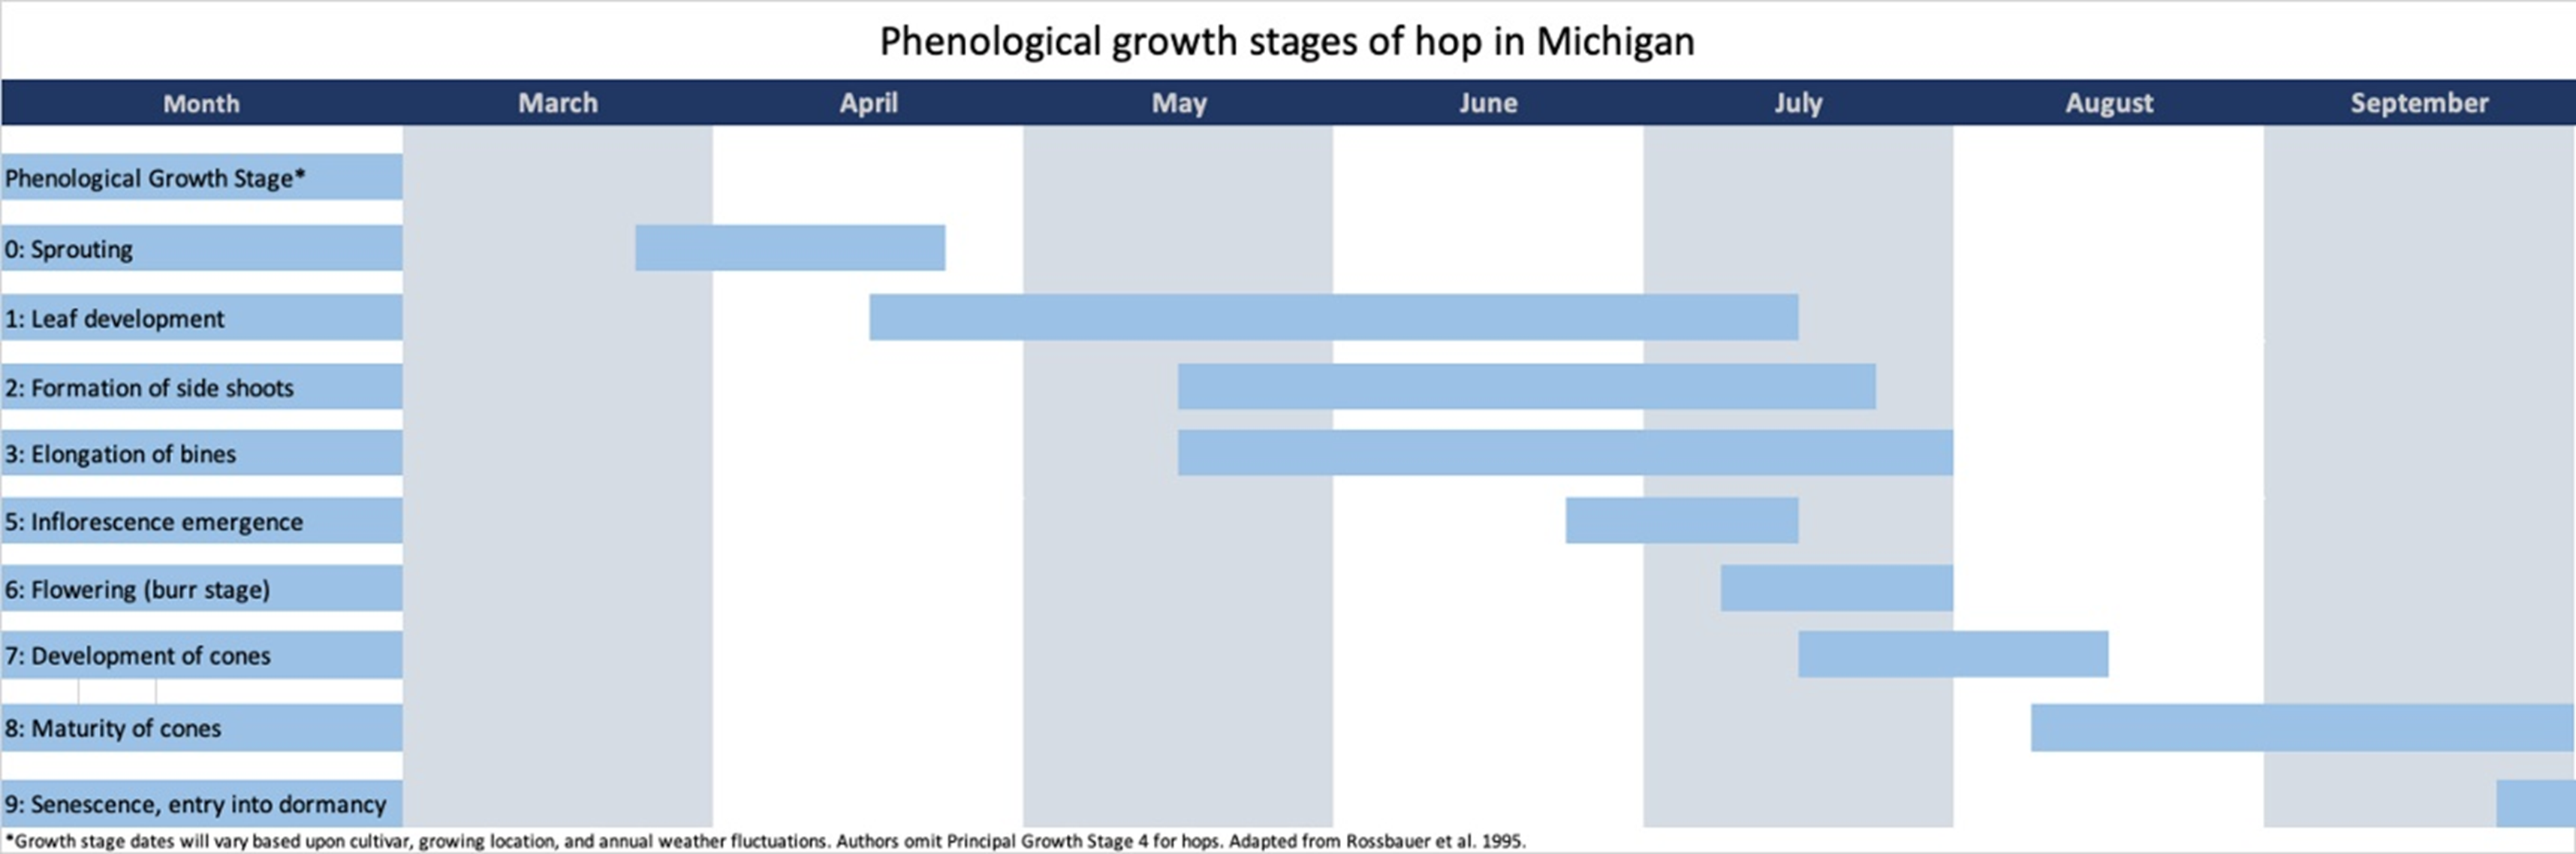 Phenological growth stages of hop in Michigan.